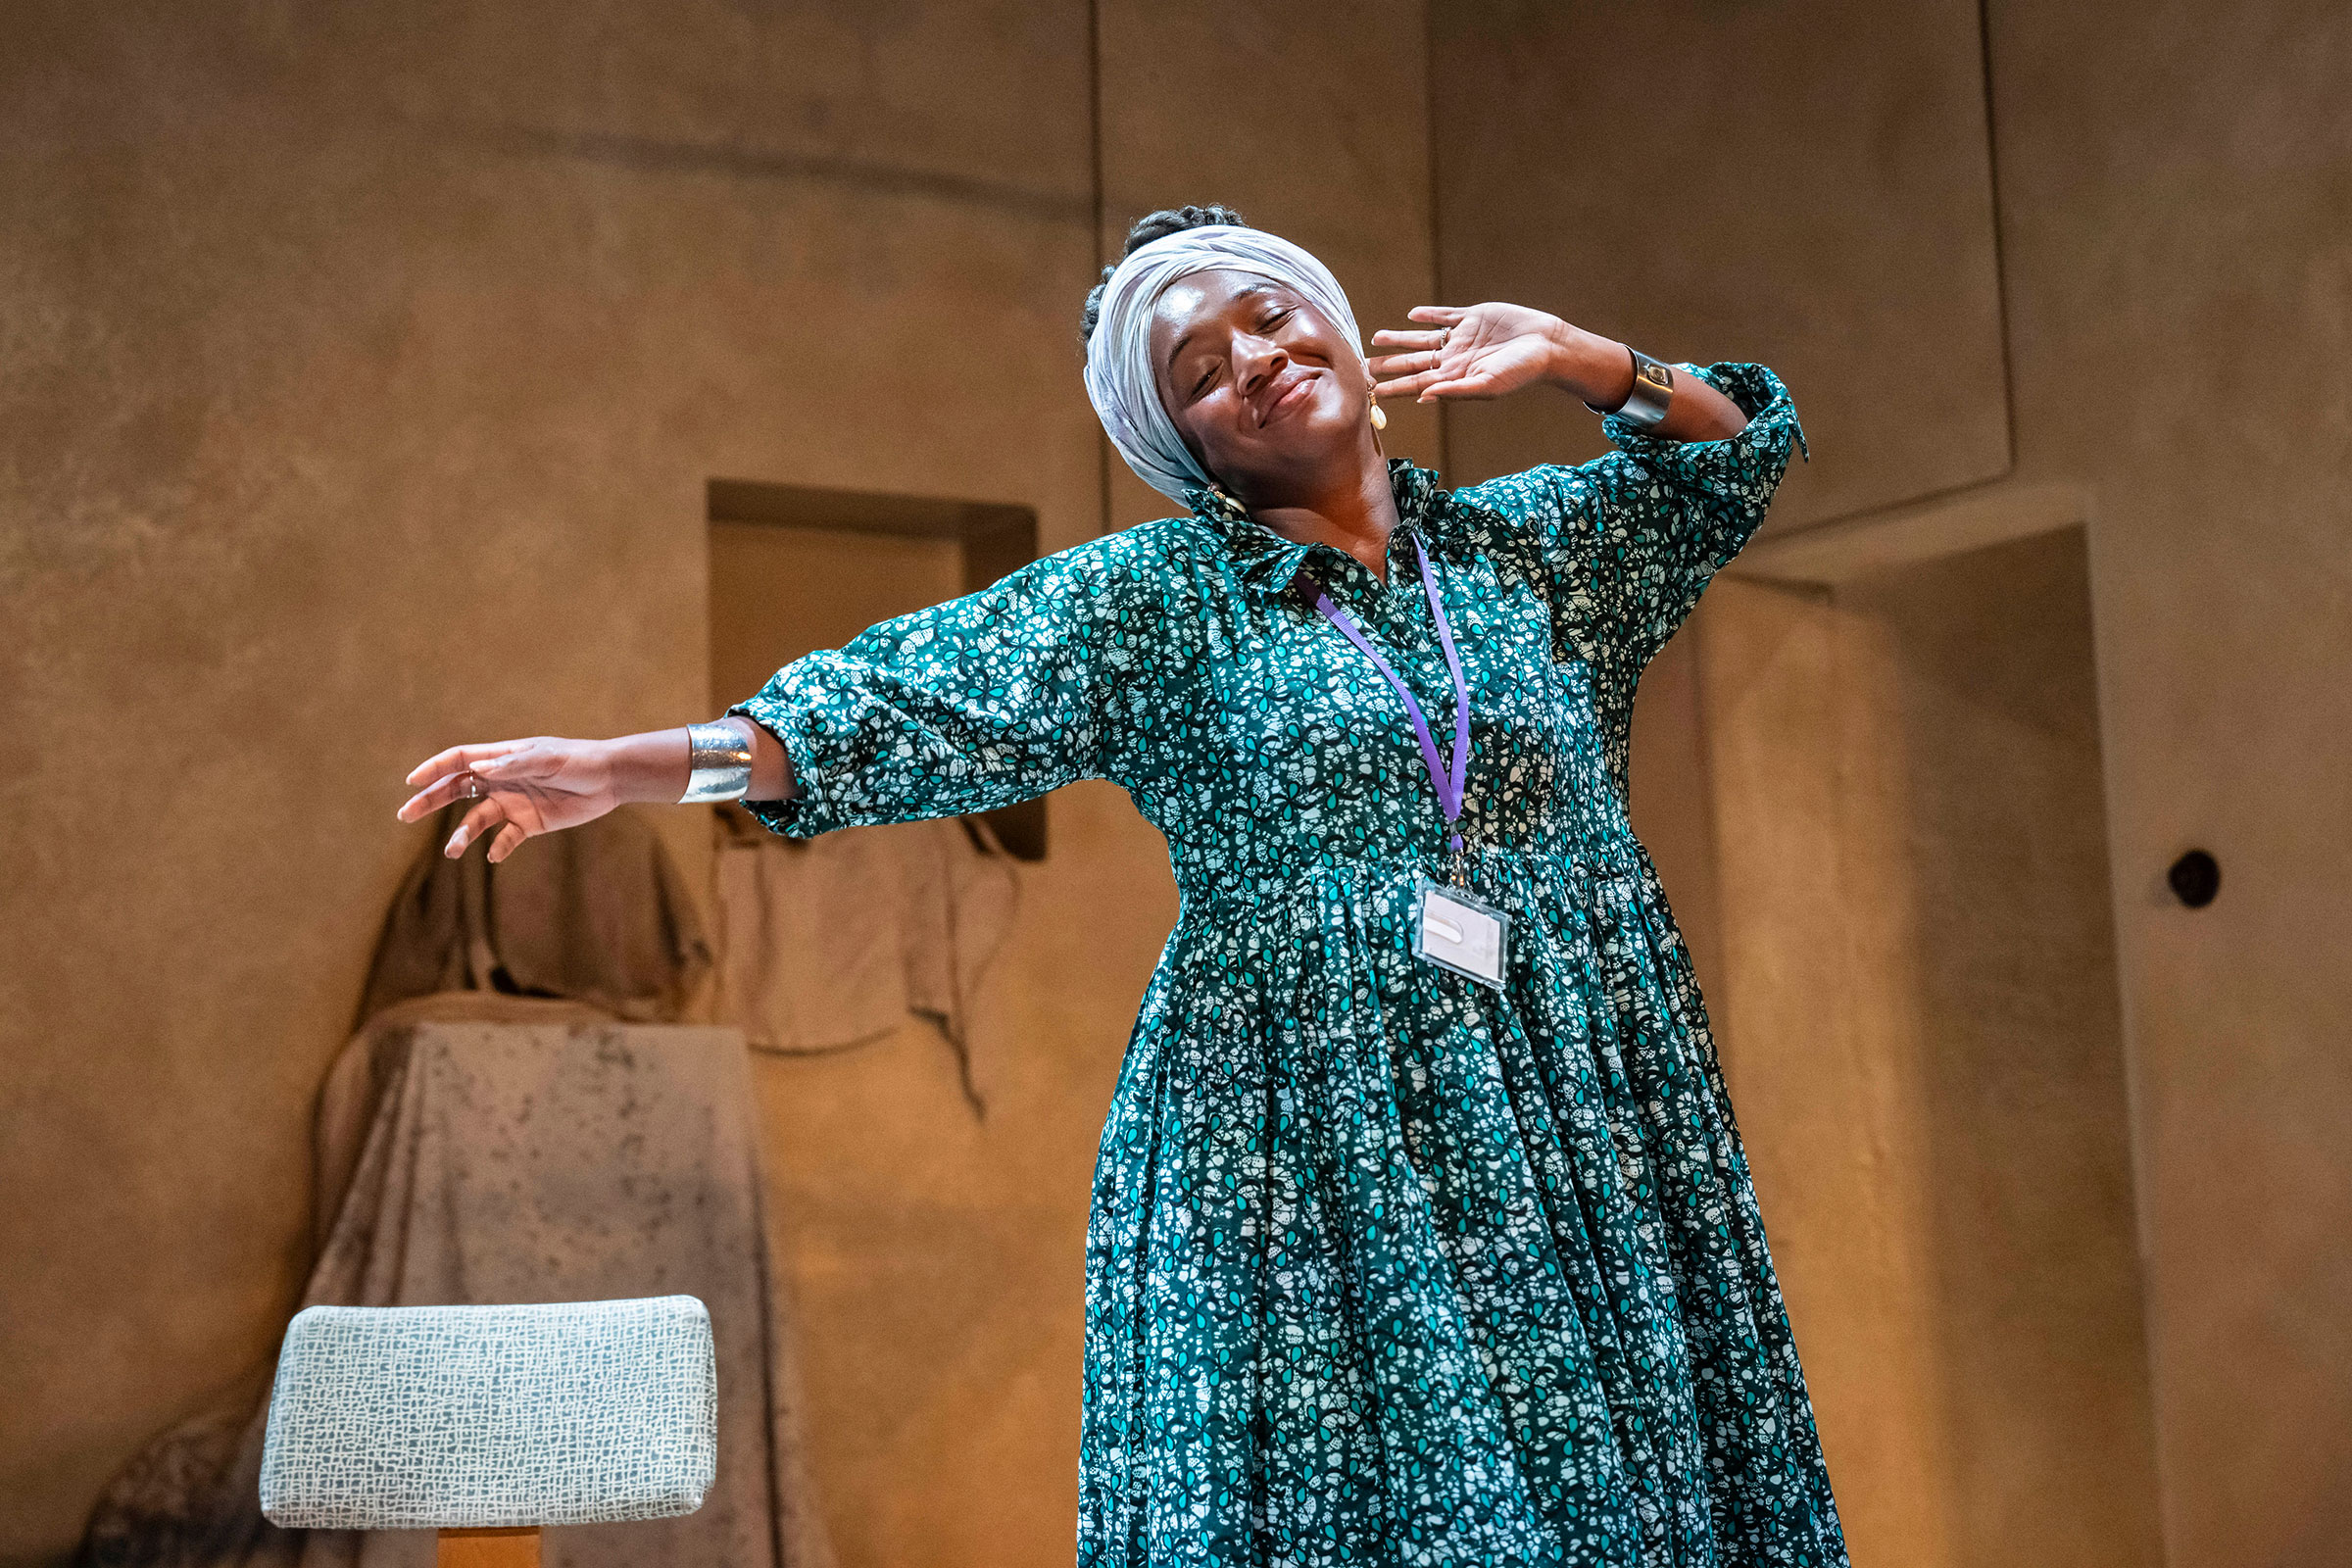 Cherrelle Skeete in Beneatha’s Place at Young Vic. © Johan Persson